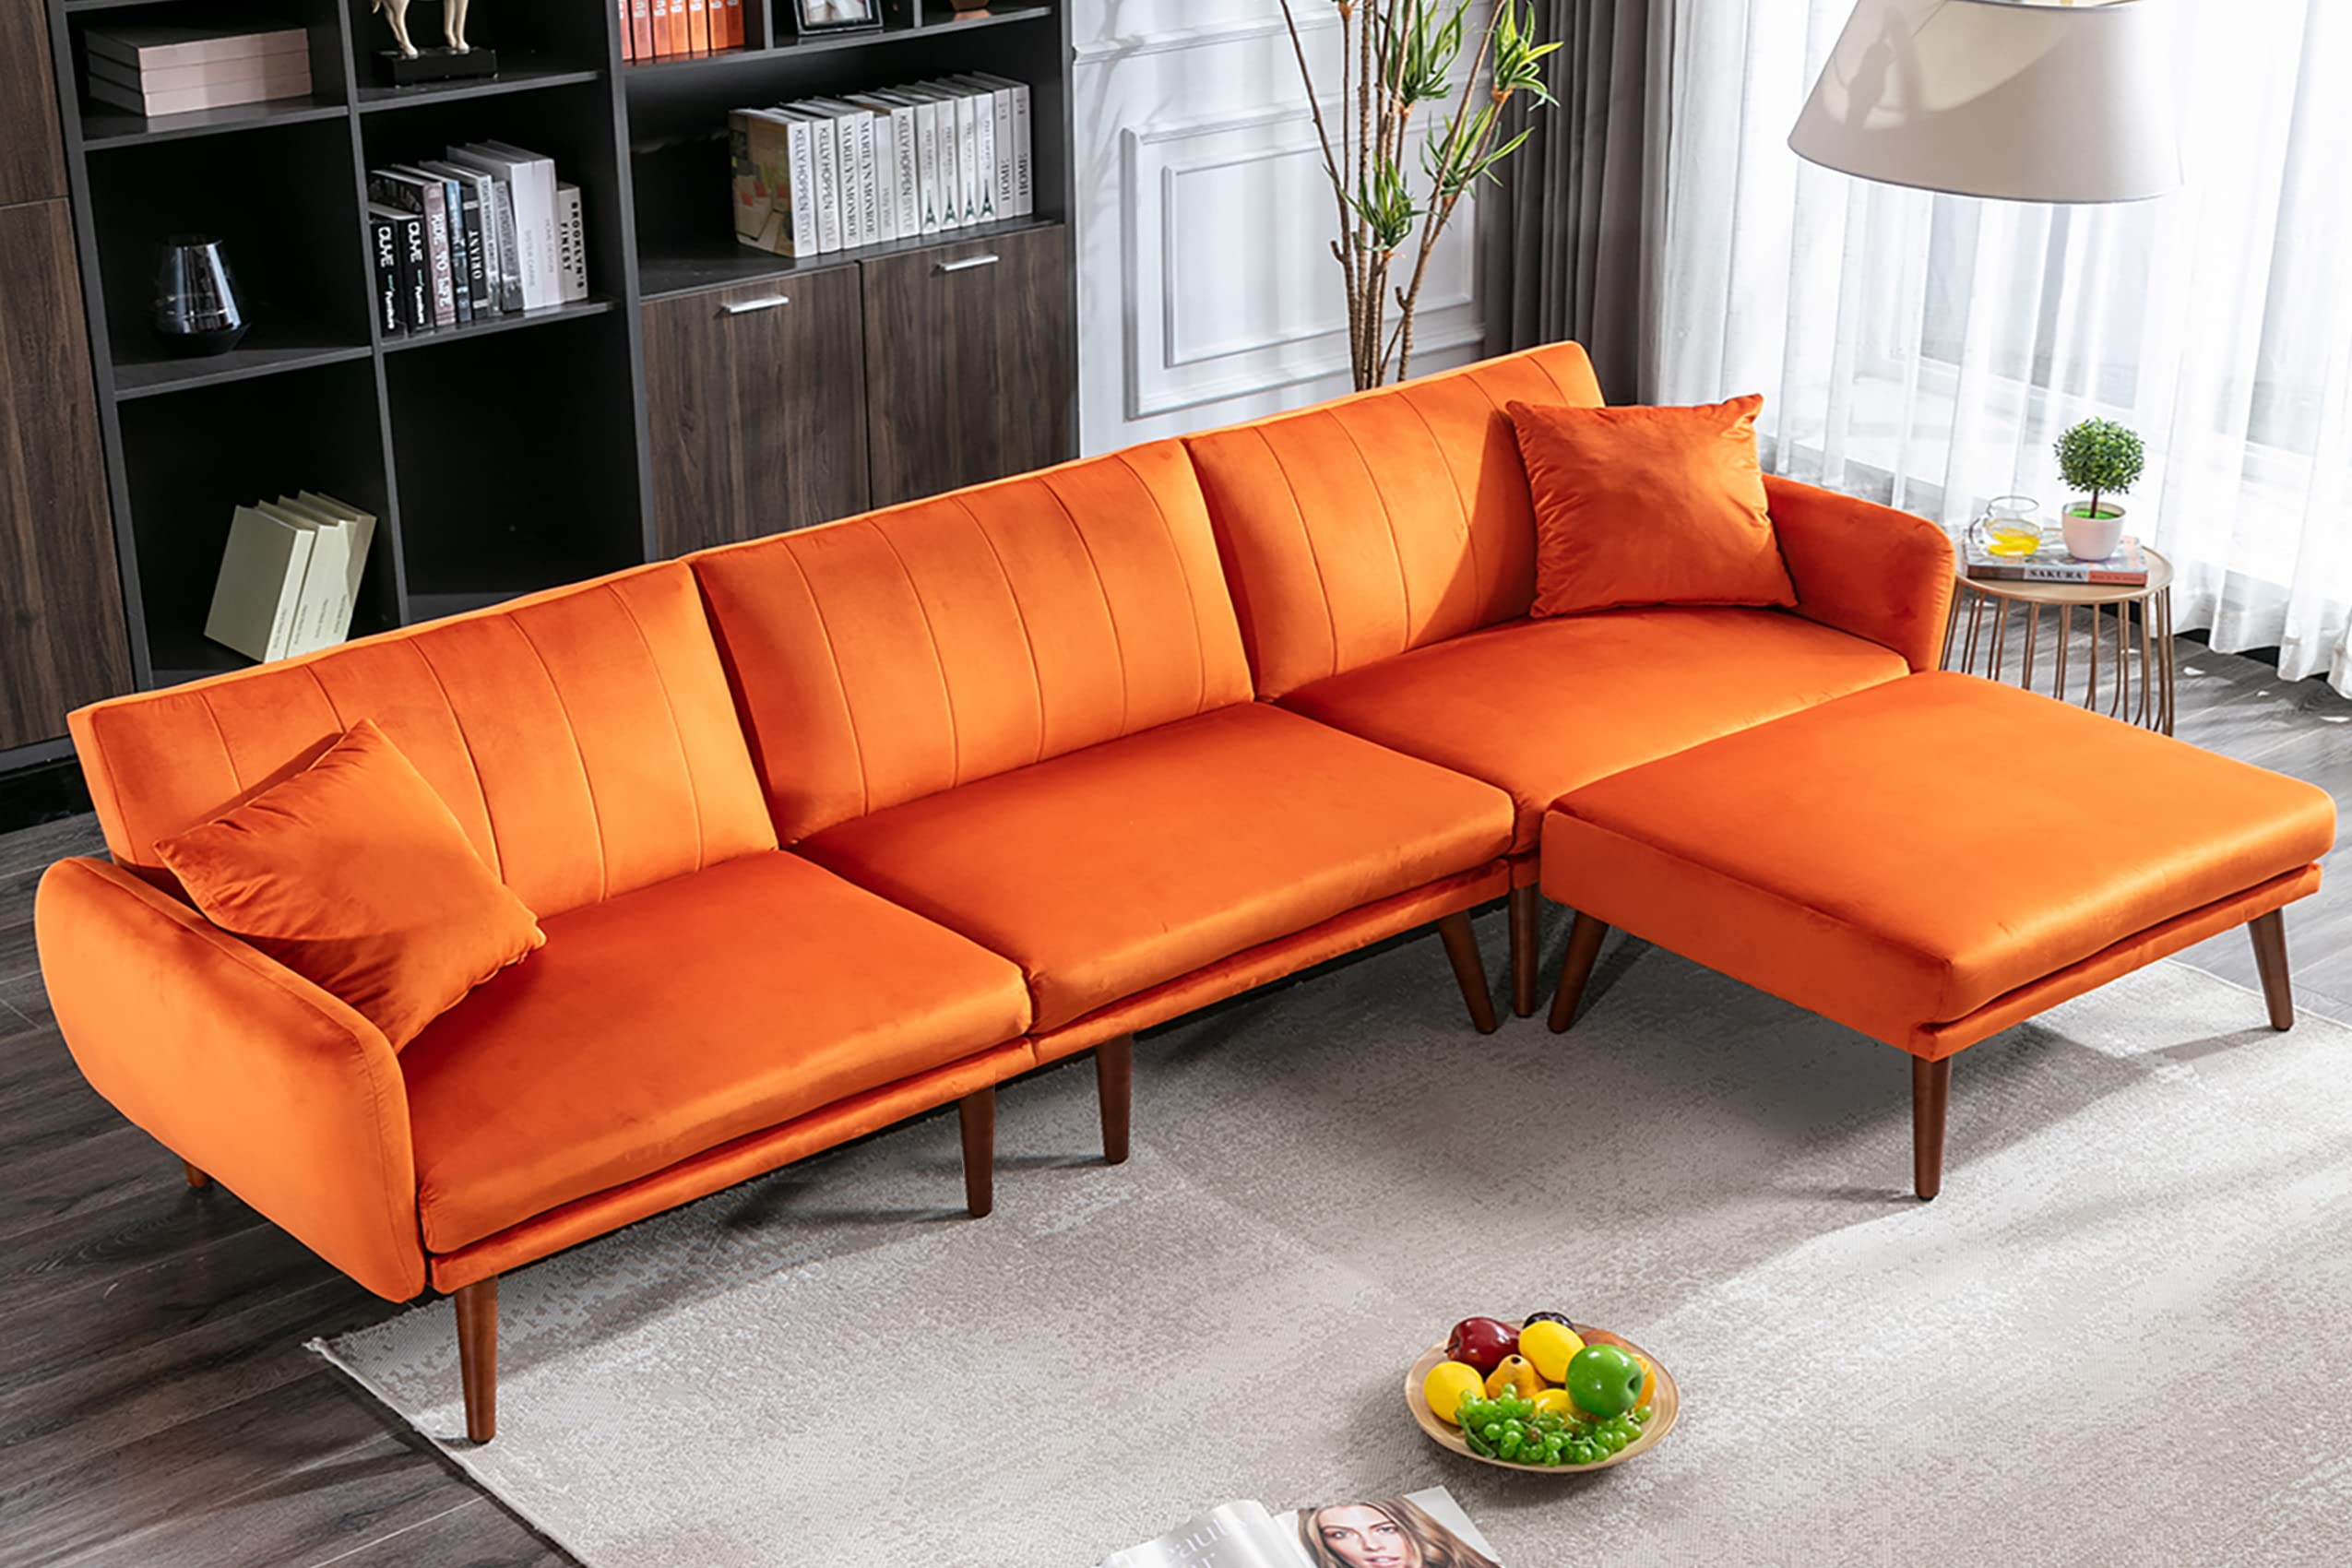 JOMEED L-Shaped Convertible Sectional Sofa Bed - Orange